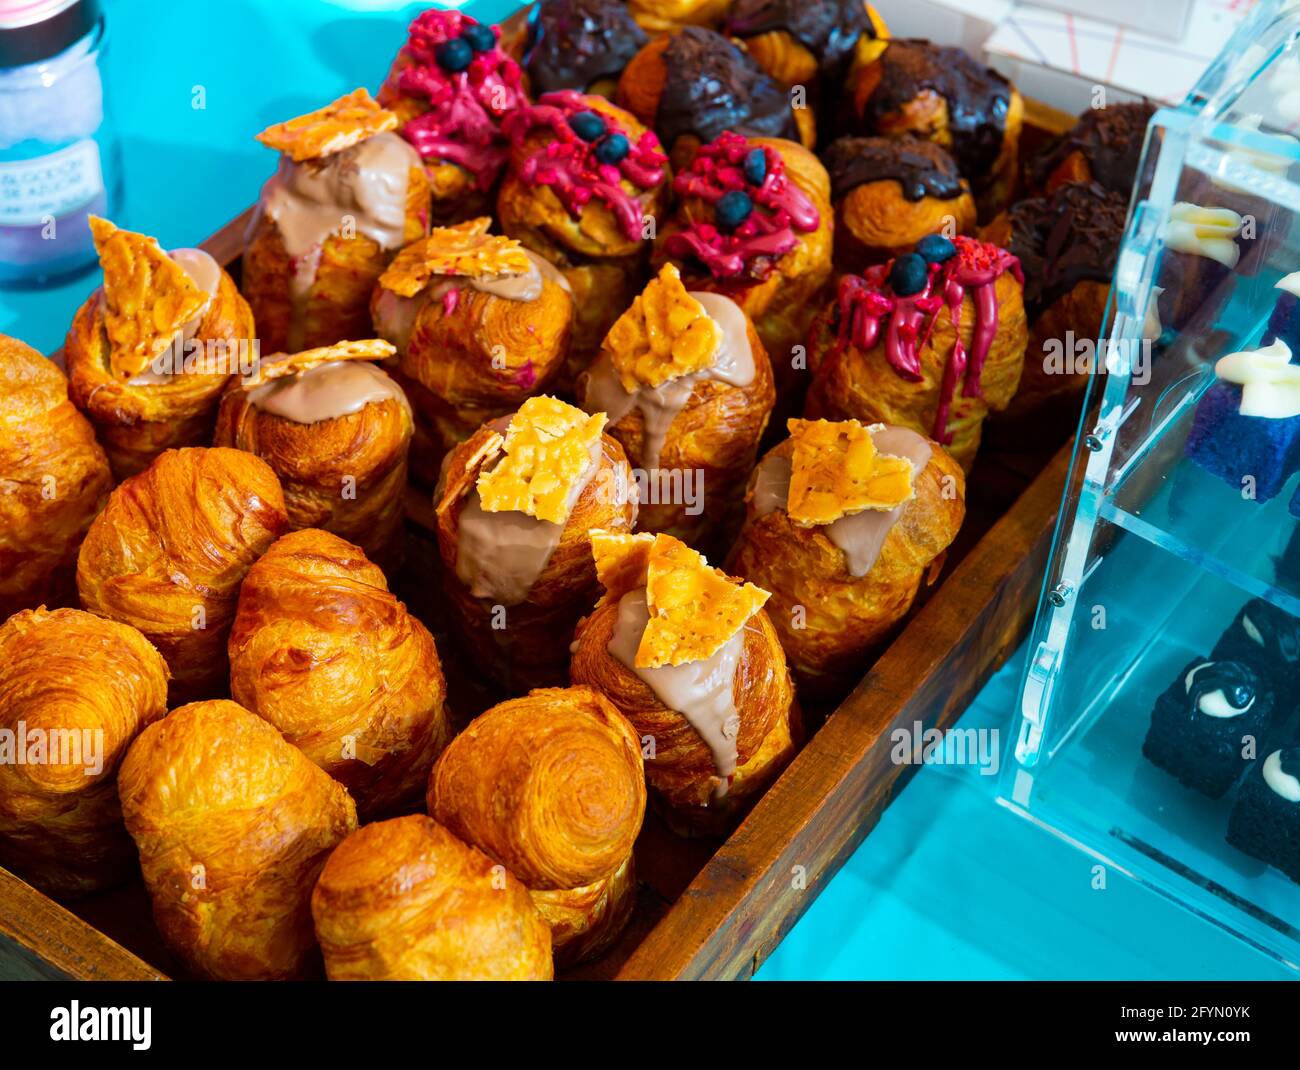 Assorted freshly baked sweet yeast dough cruffins with various topping Stock Photo